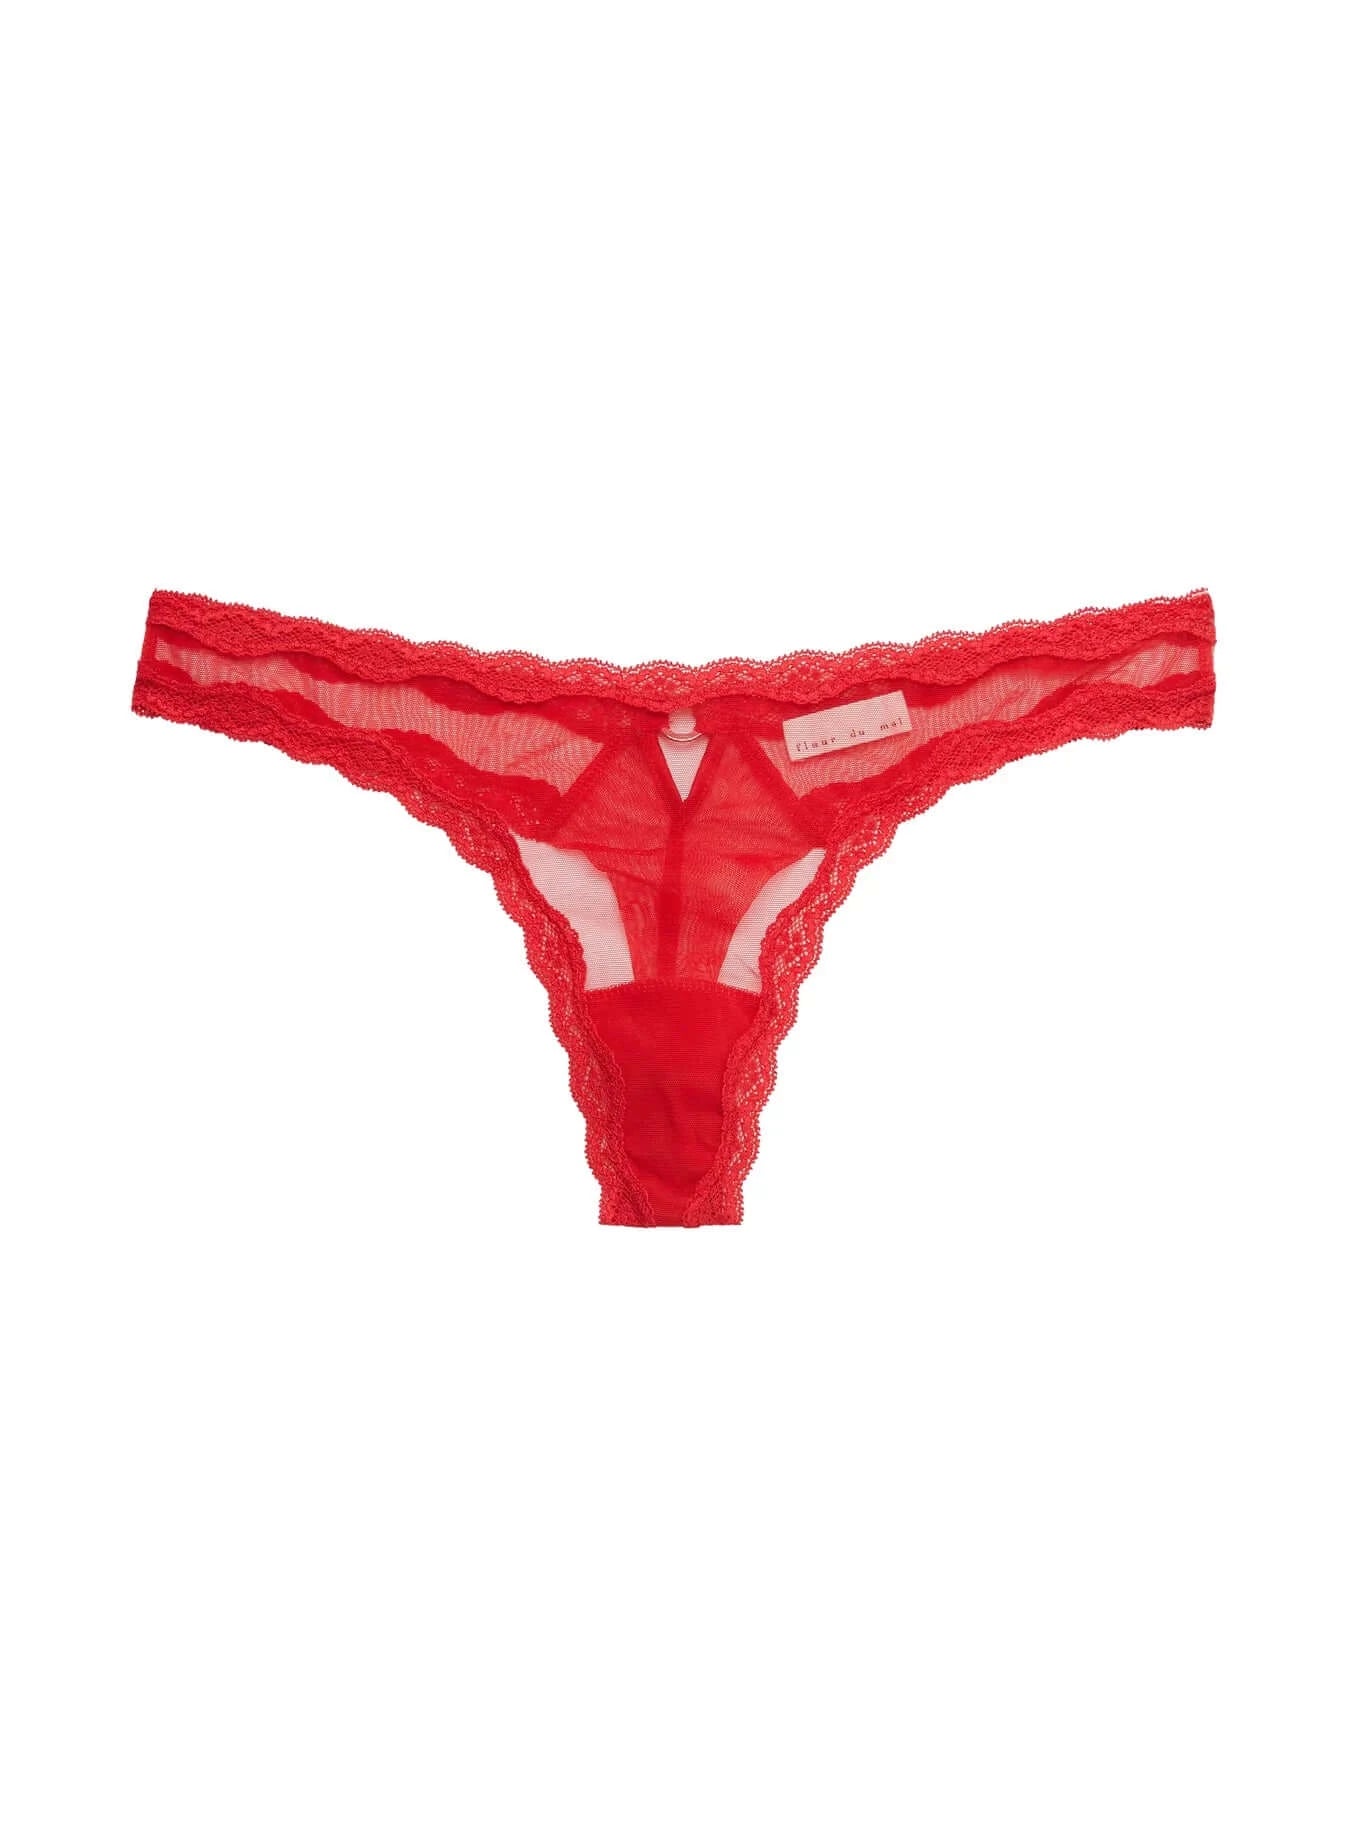 Victorias Secret Nylon Red Thong Underwear with Ivory Lace and